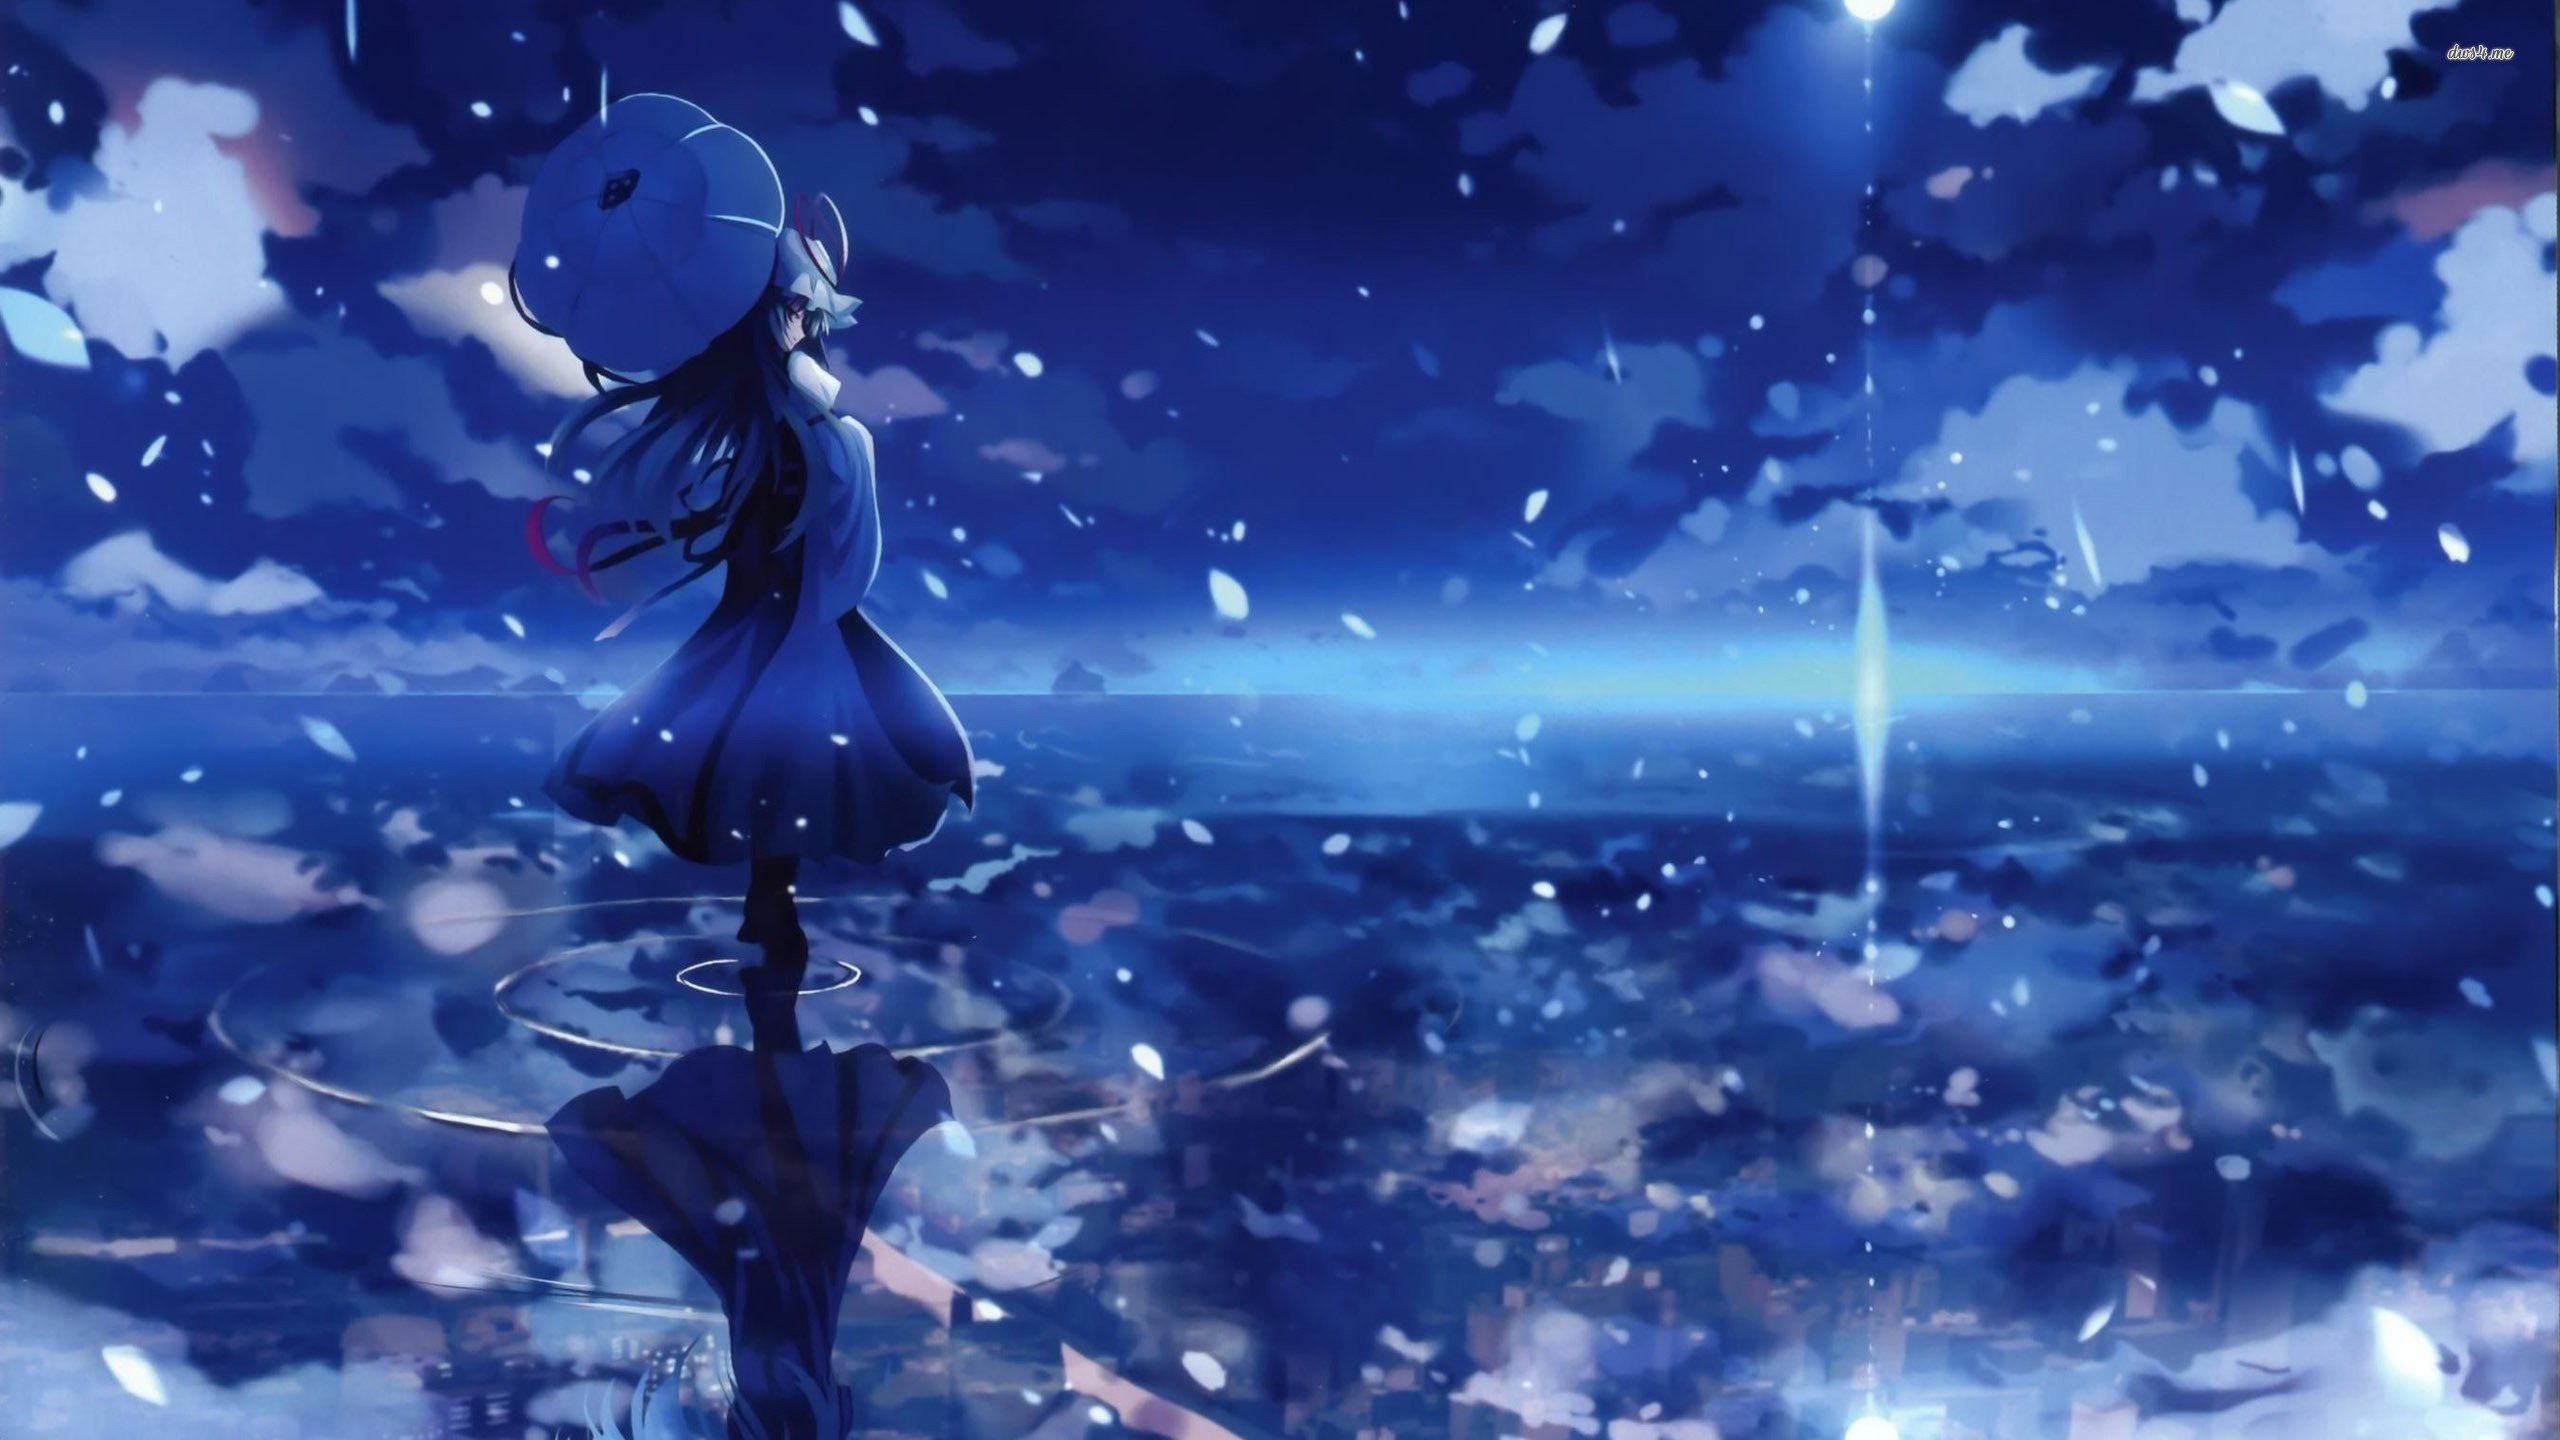 Touhou Project wallpaper   Anime wallpapers   15520